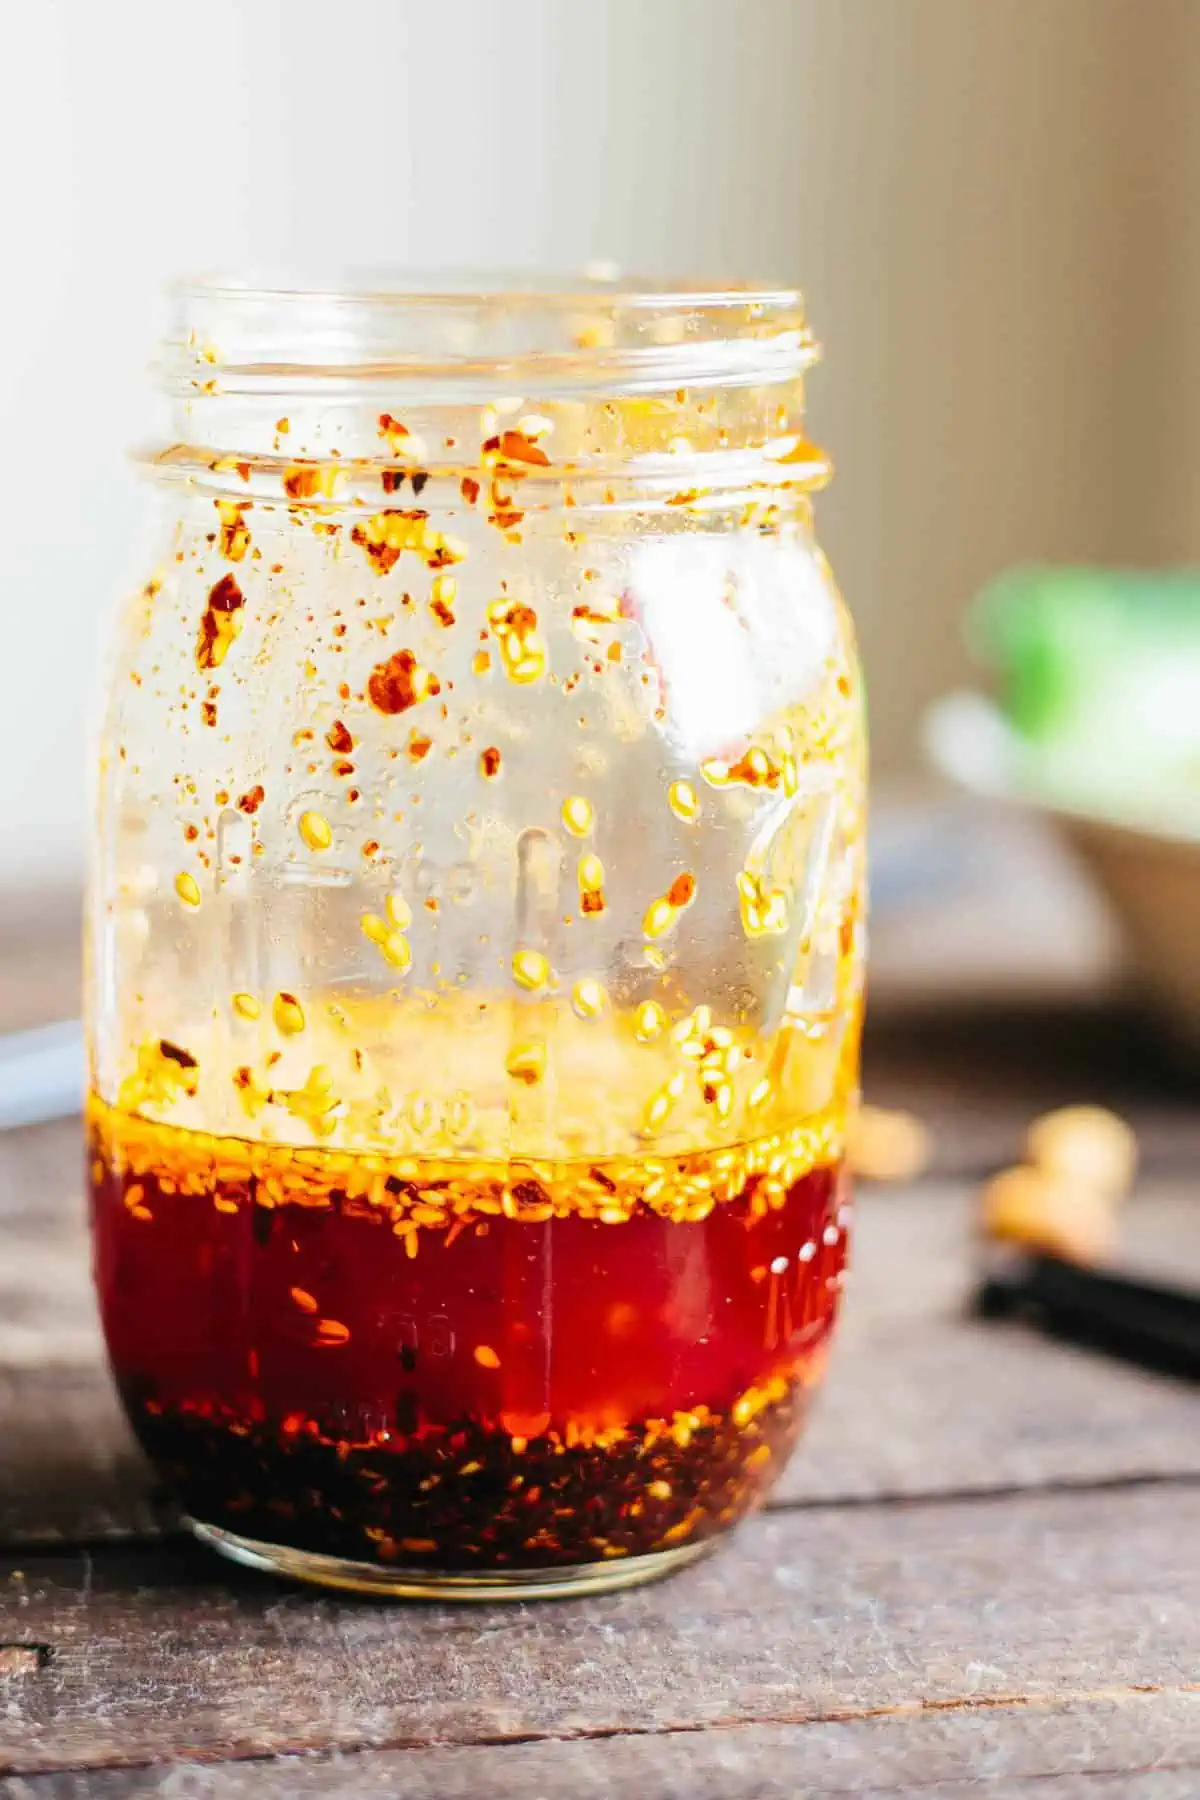 Close up side view of a glass jar of homemade chili oil.